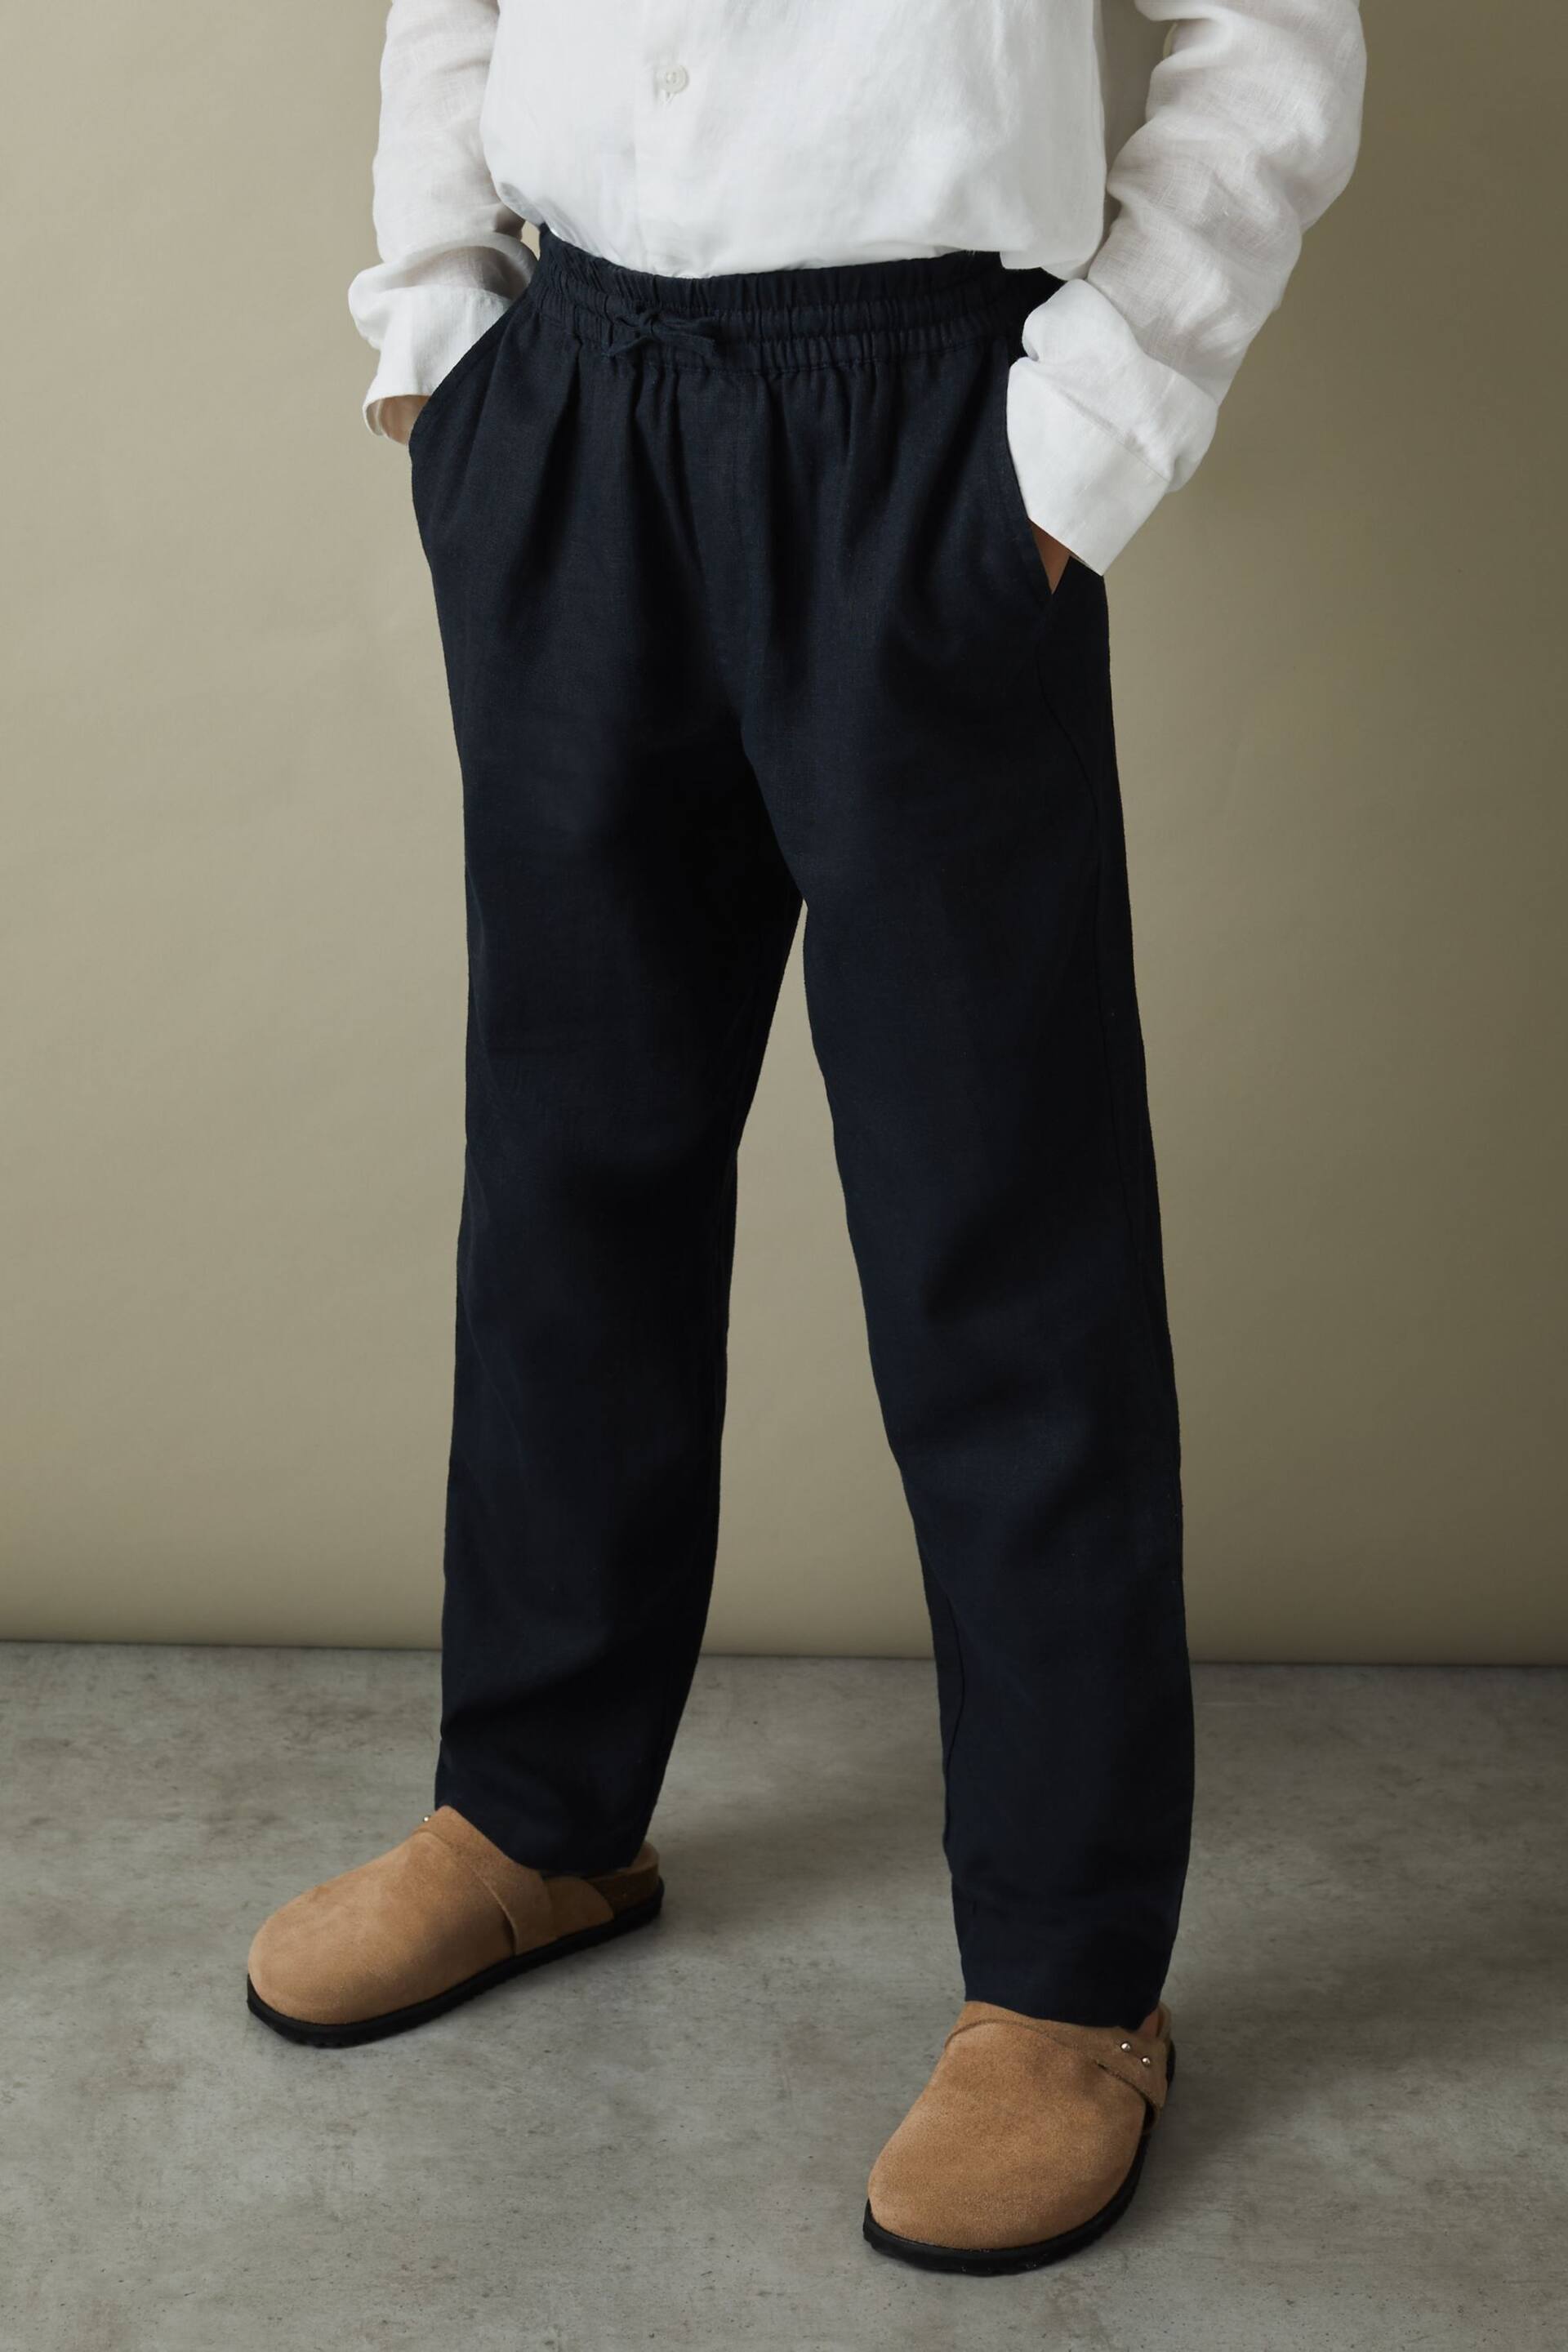 Reiss Navy Wilfred Senior Linen Drawstring Tapered Trousers - Image 1 of 4